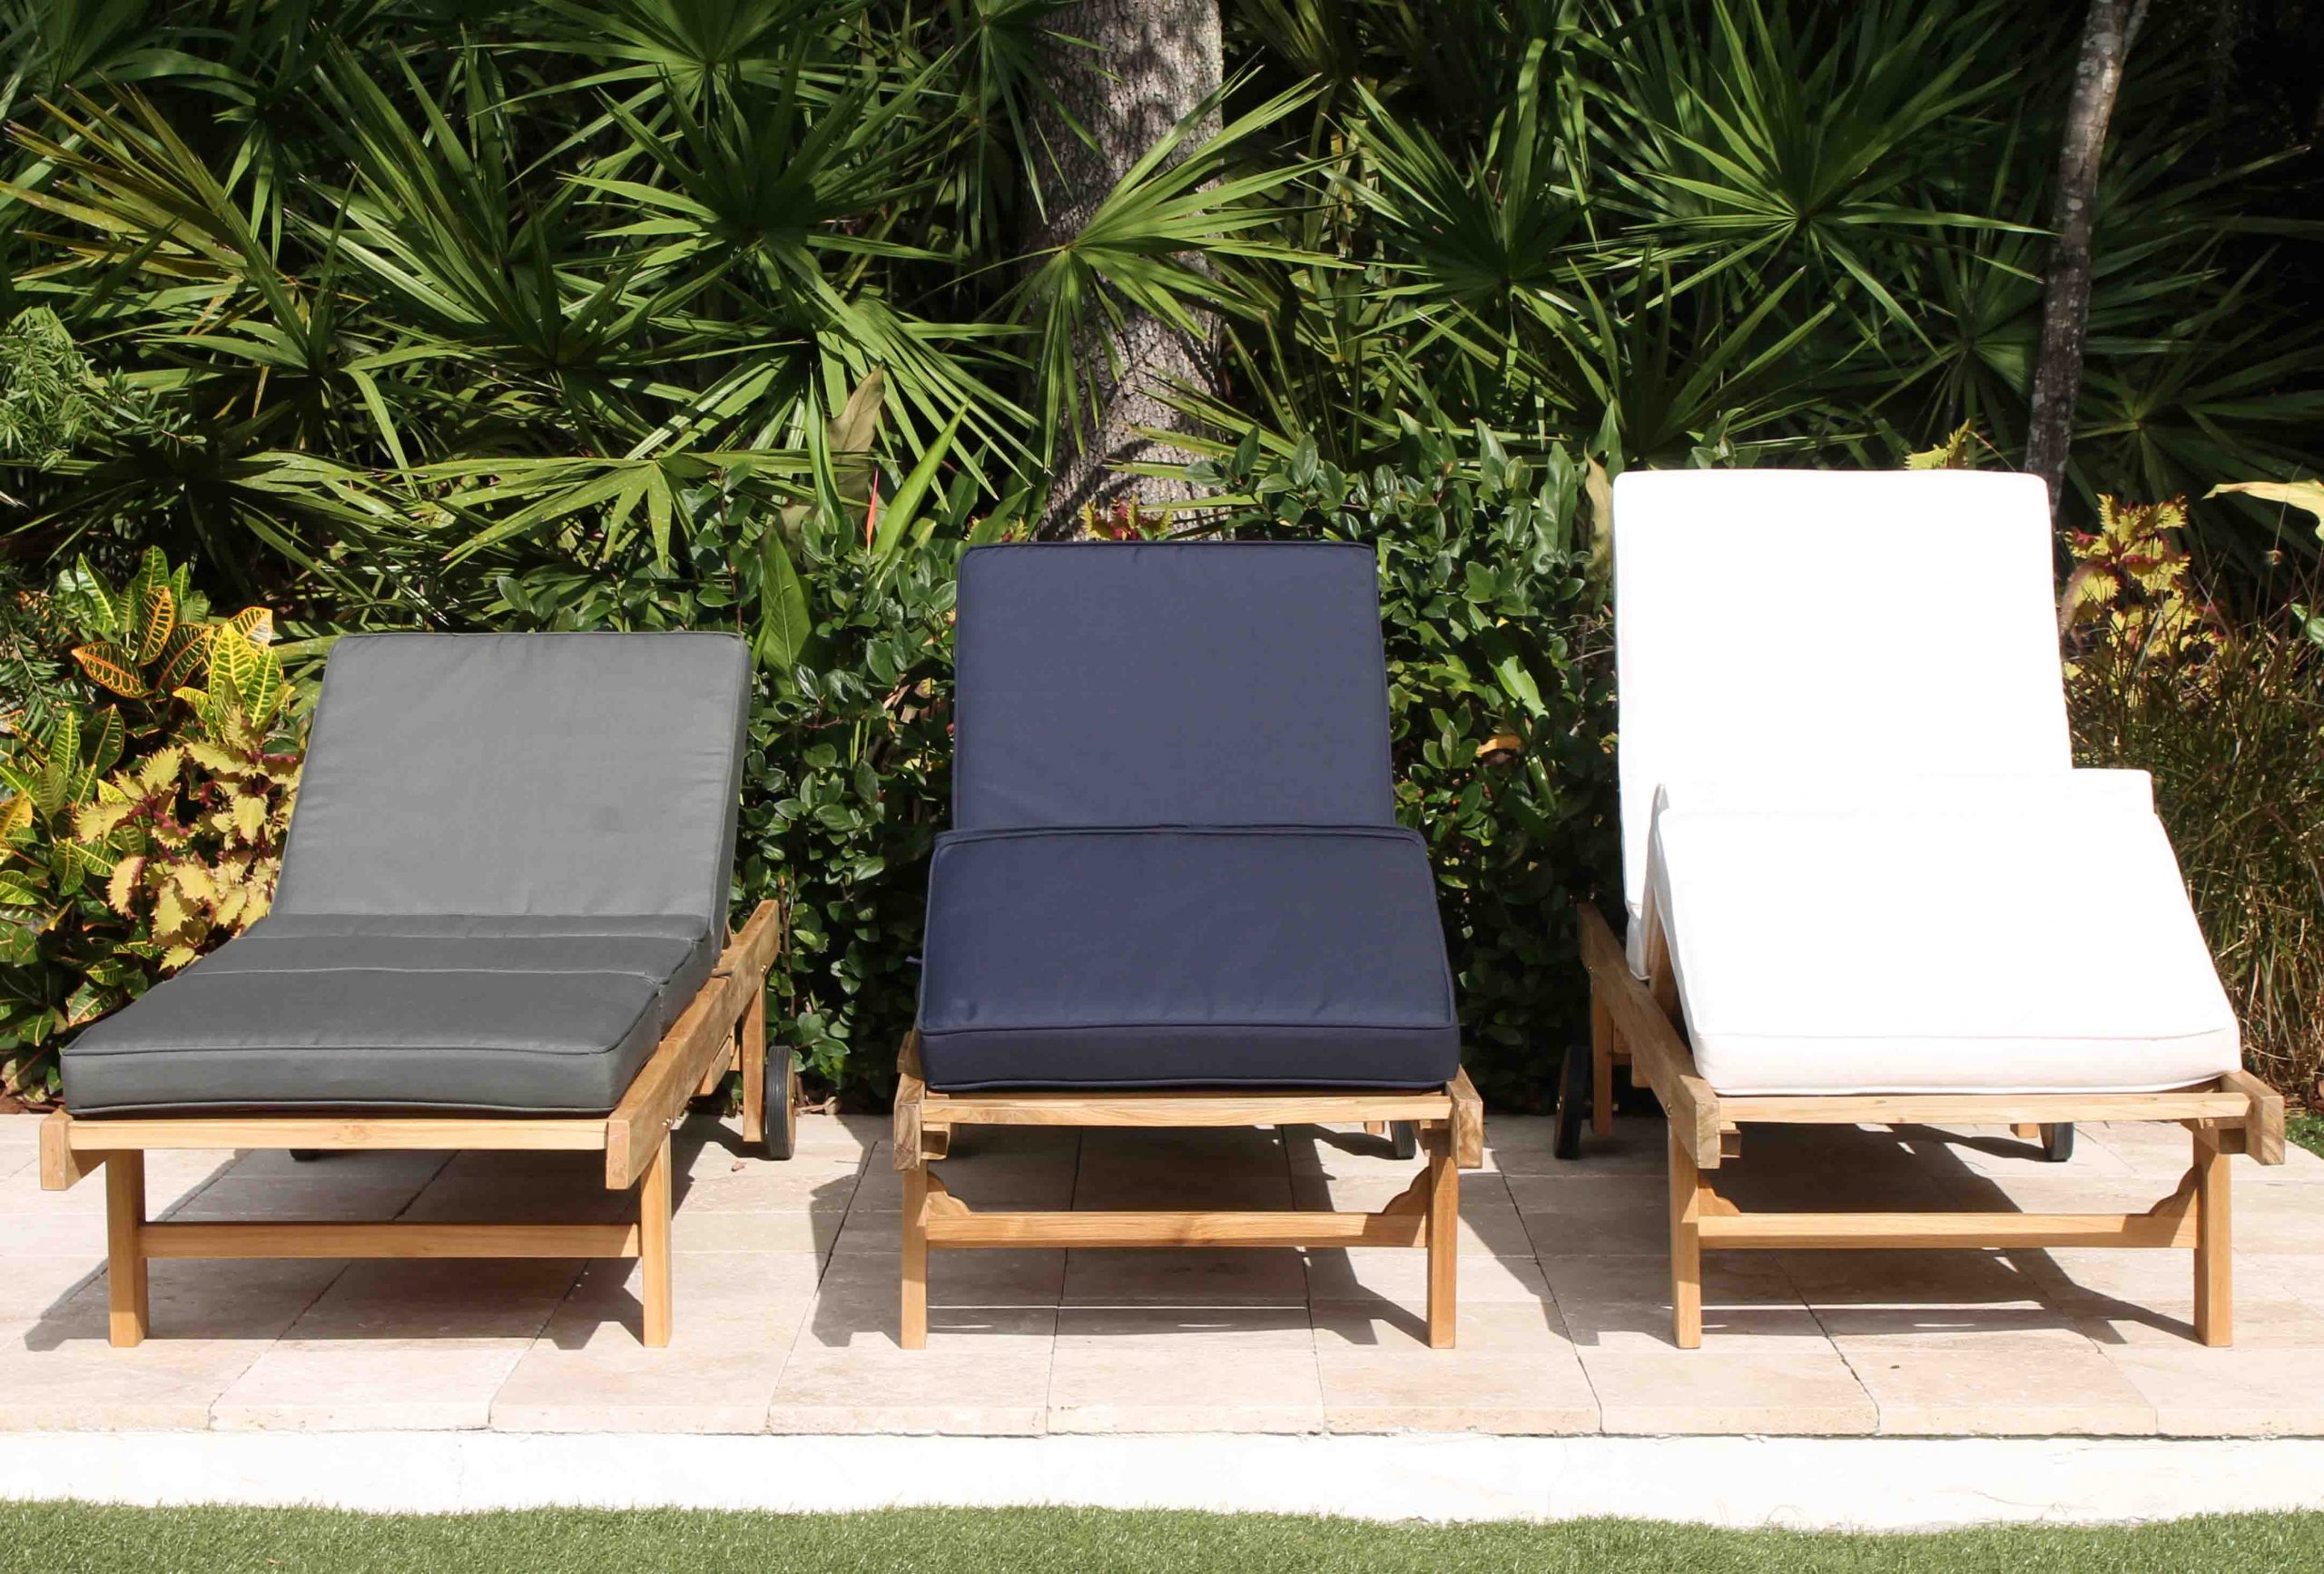 Deluxe Lounger Cushions - front